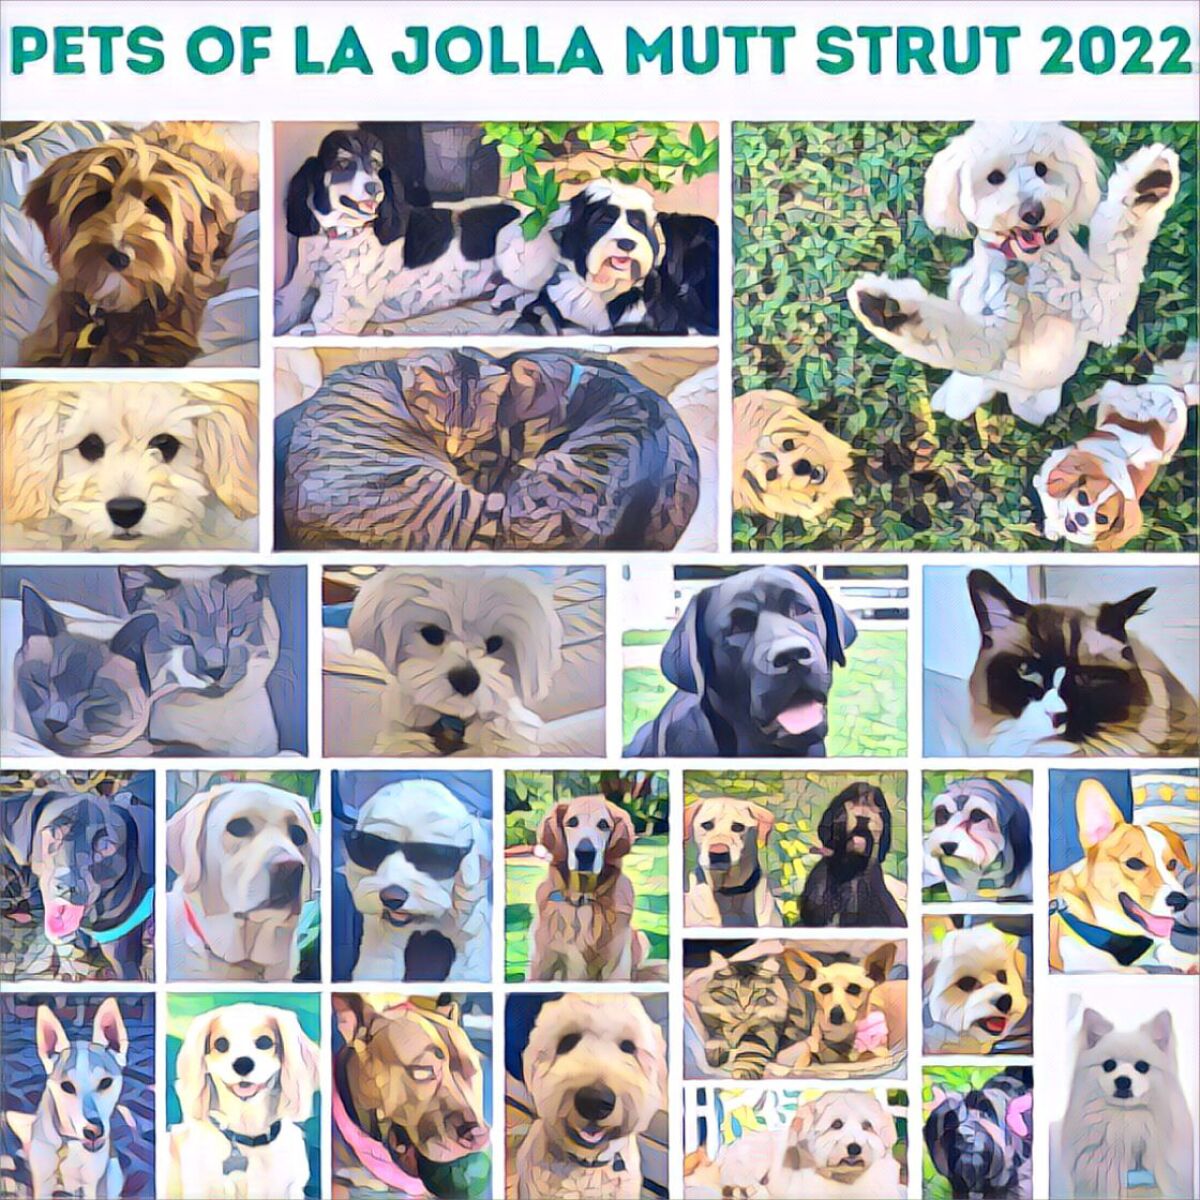 The inaugural "La Jolla Mutt Strut" plans to unleash furry friends on The Village on Saturday, May 7.